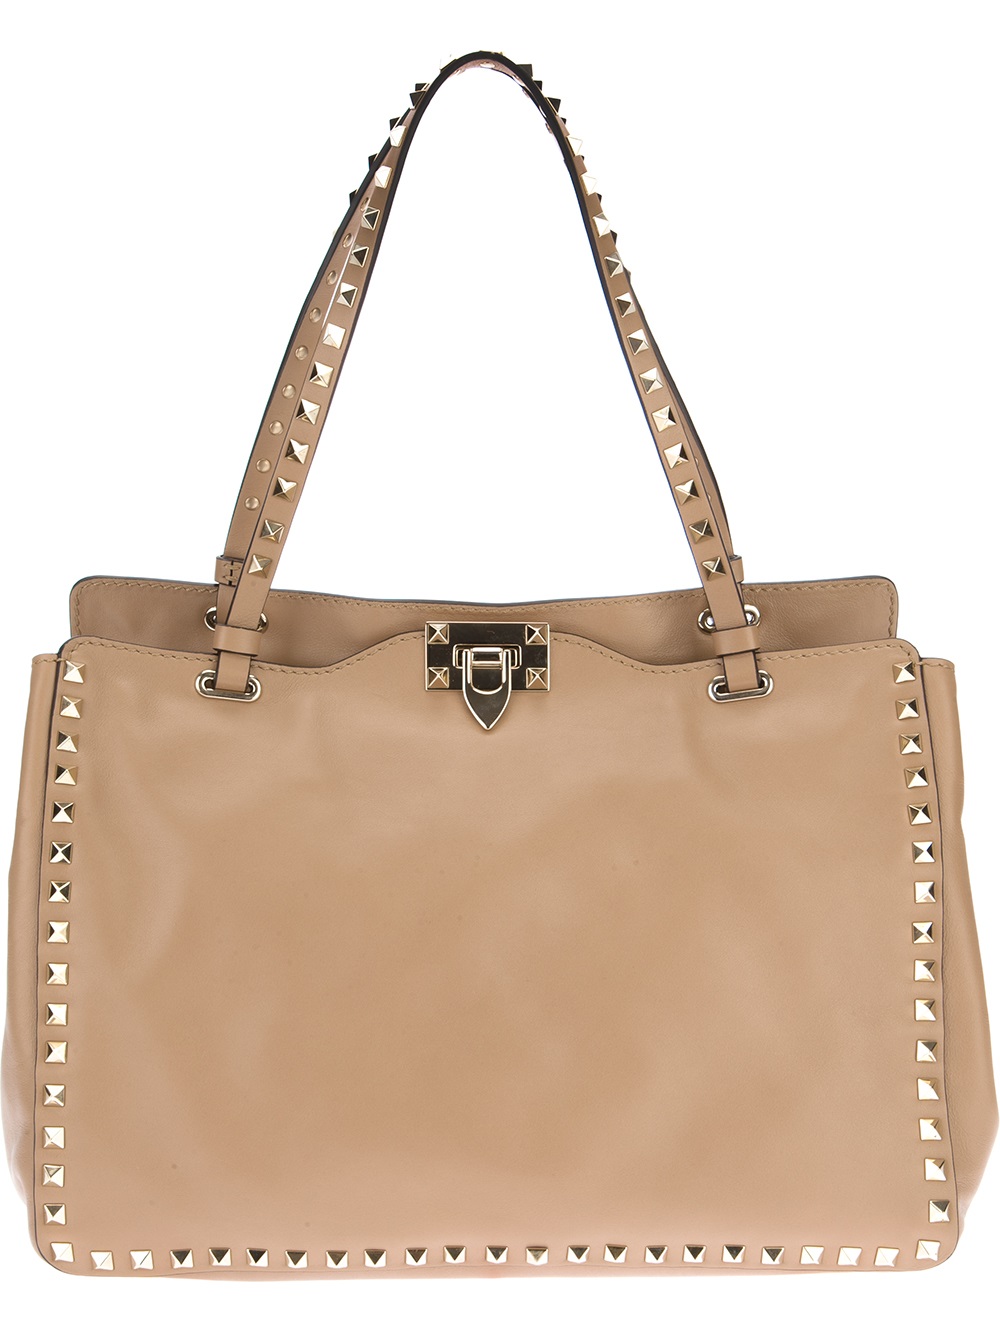 Valentino Studded Tote Bag in Natural | Lyst